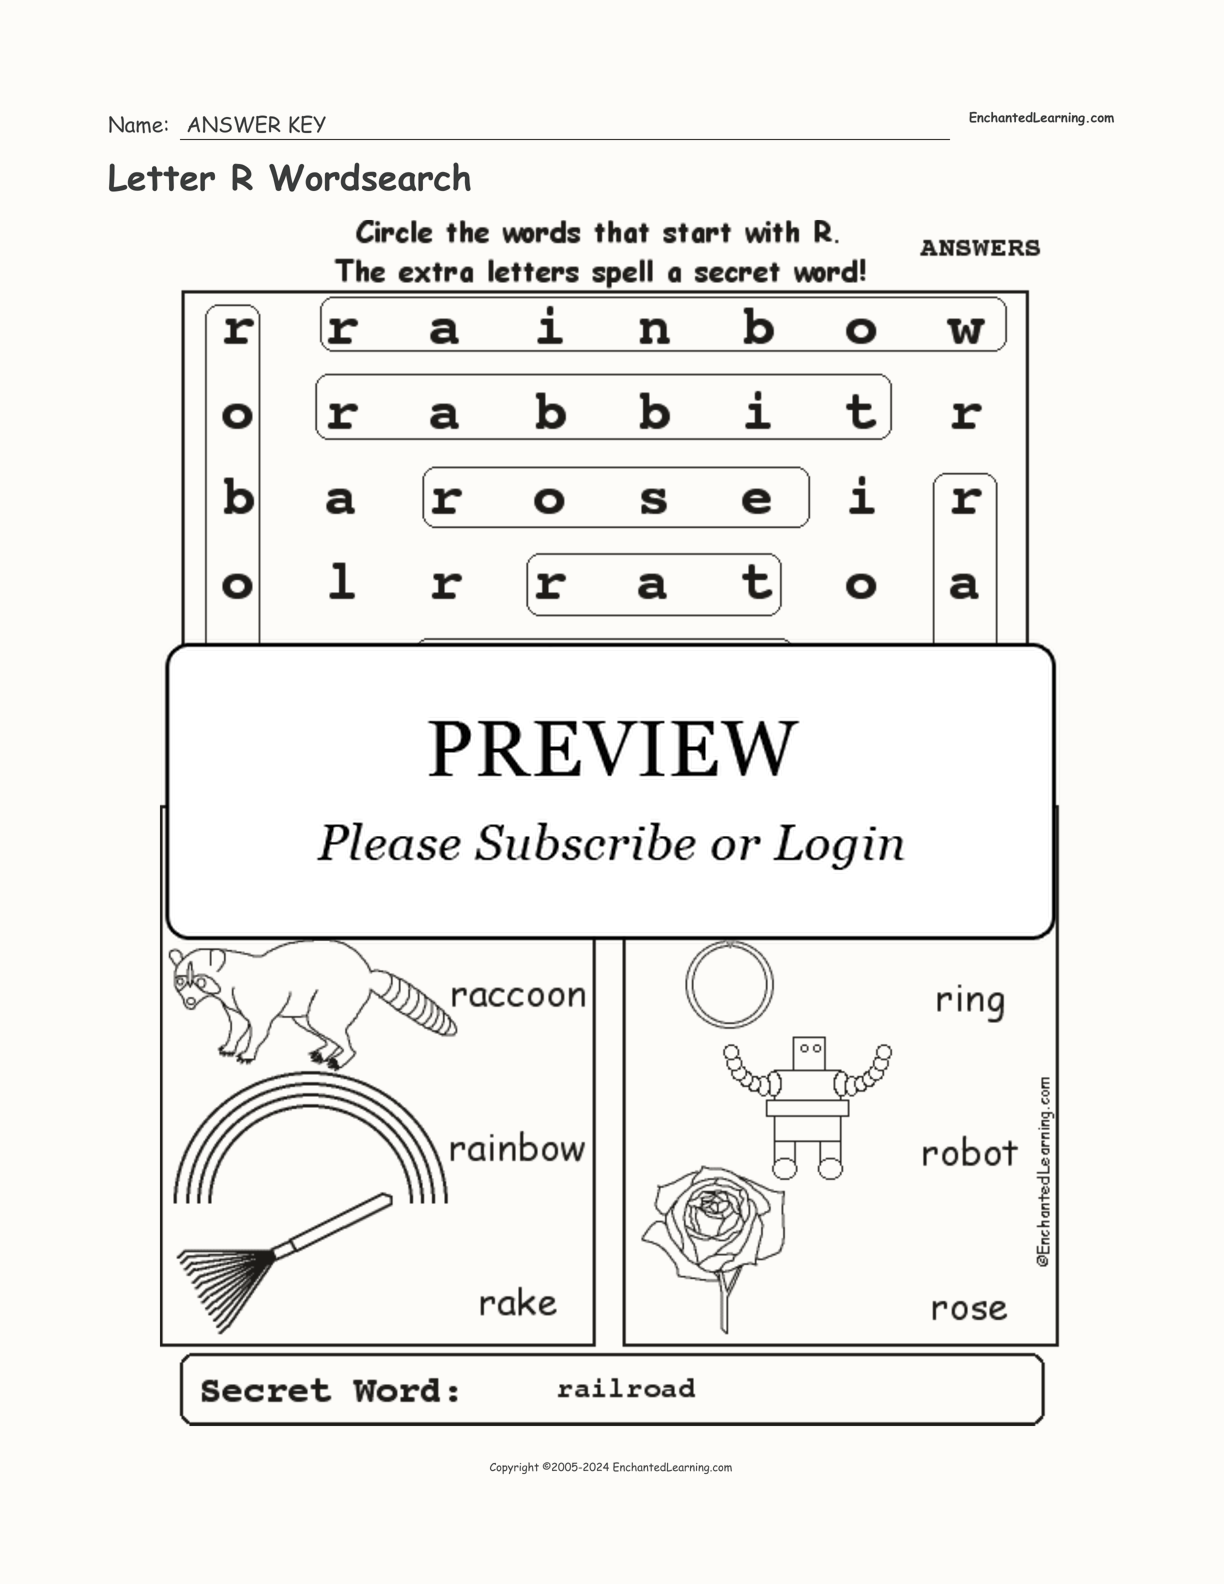 Letter R Wordsearch interactive worksheet page 2